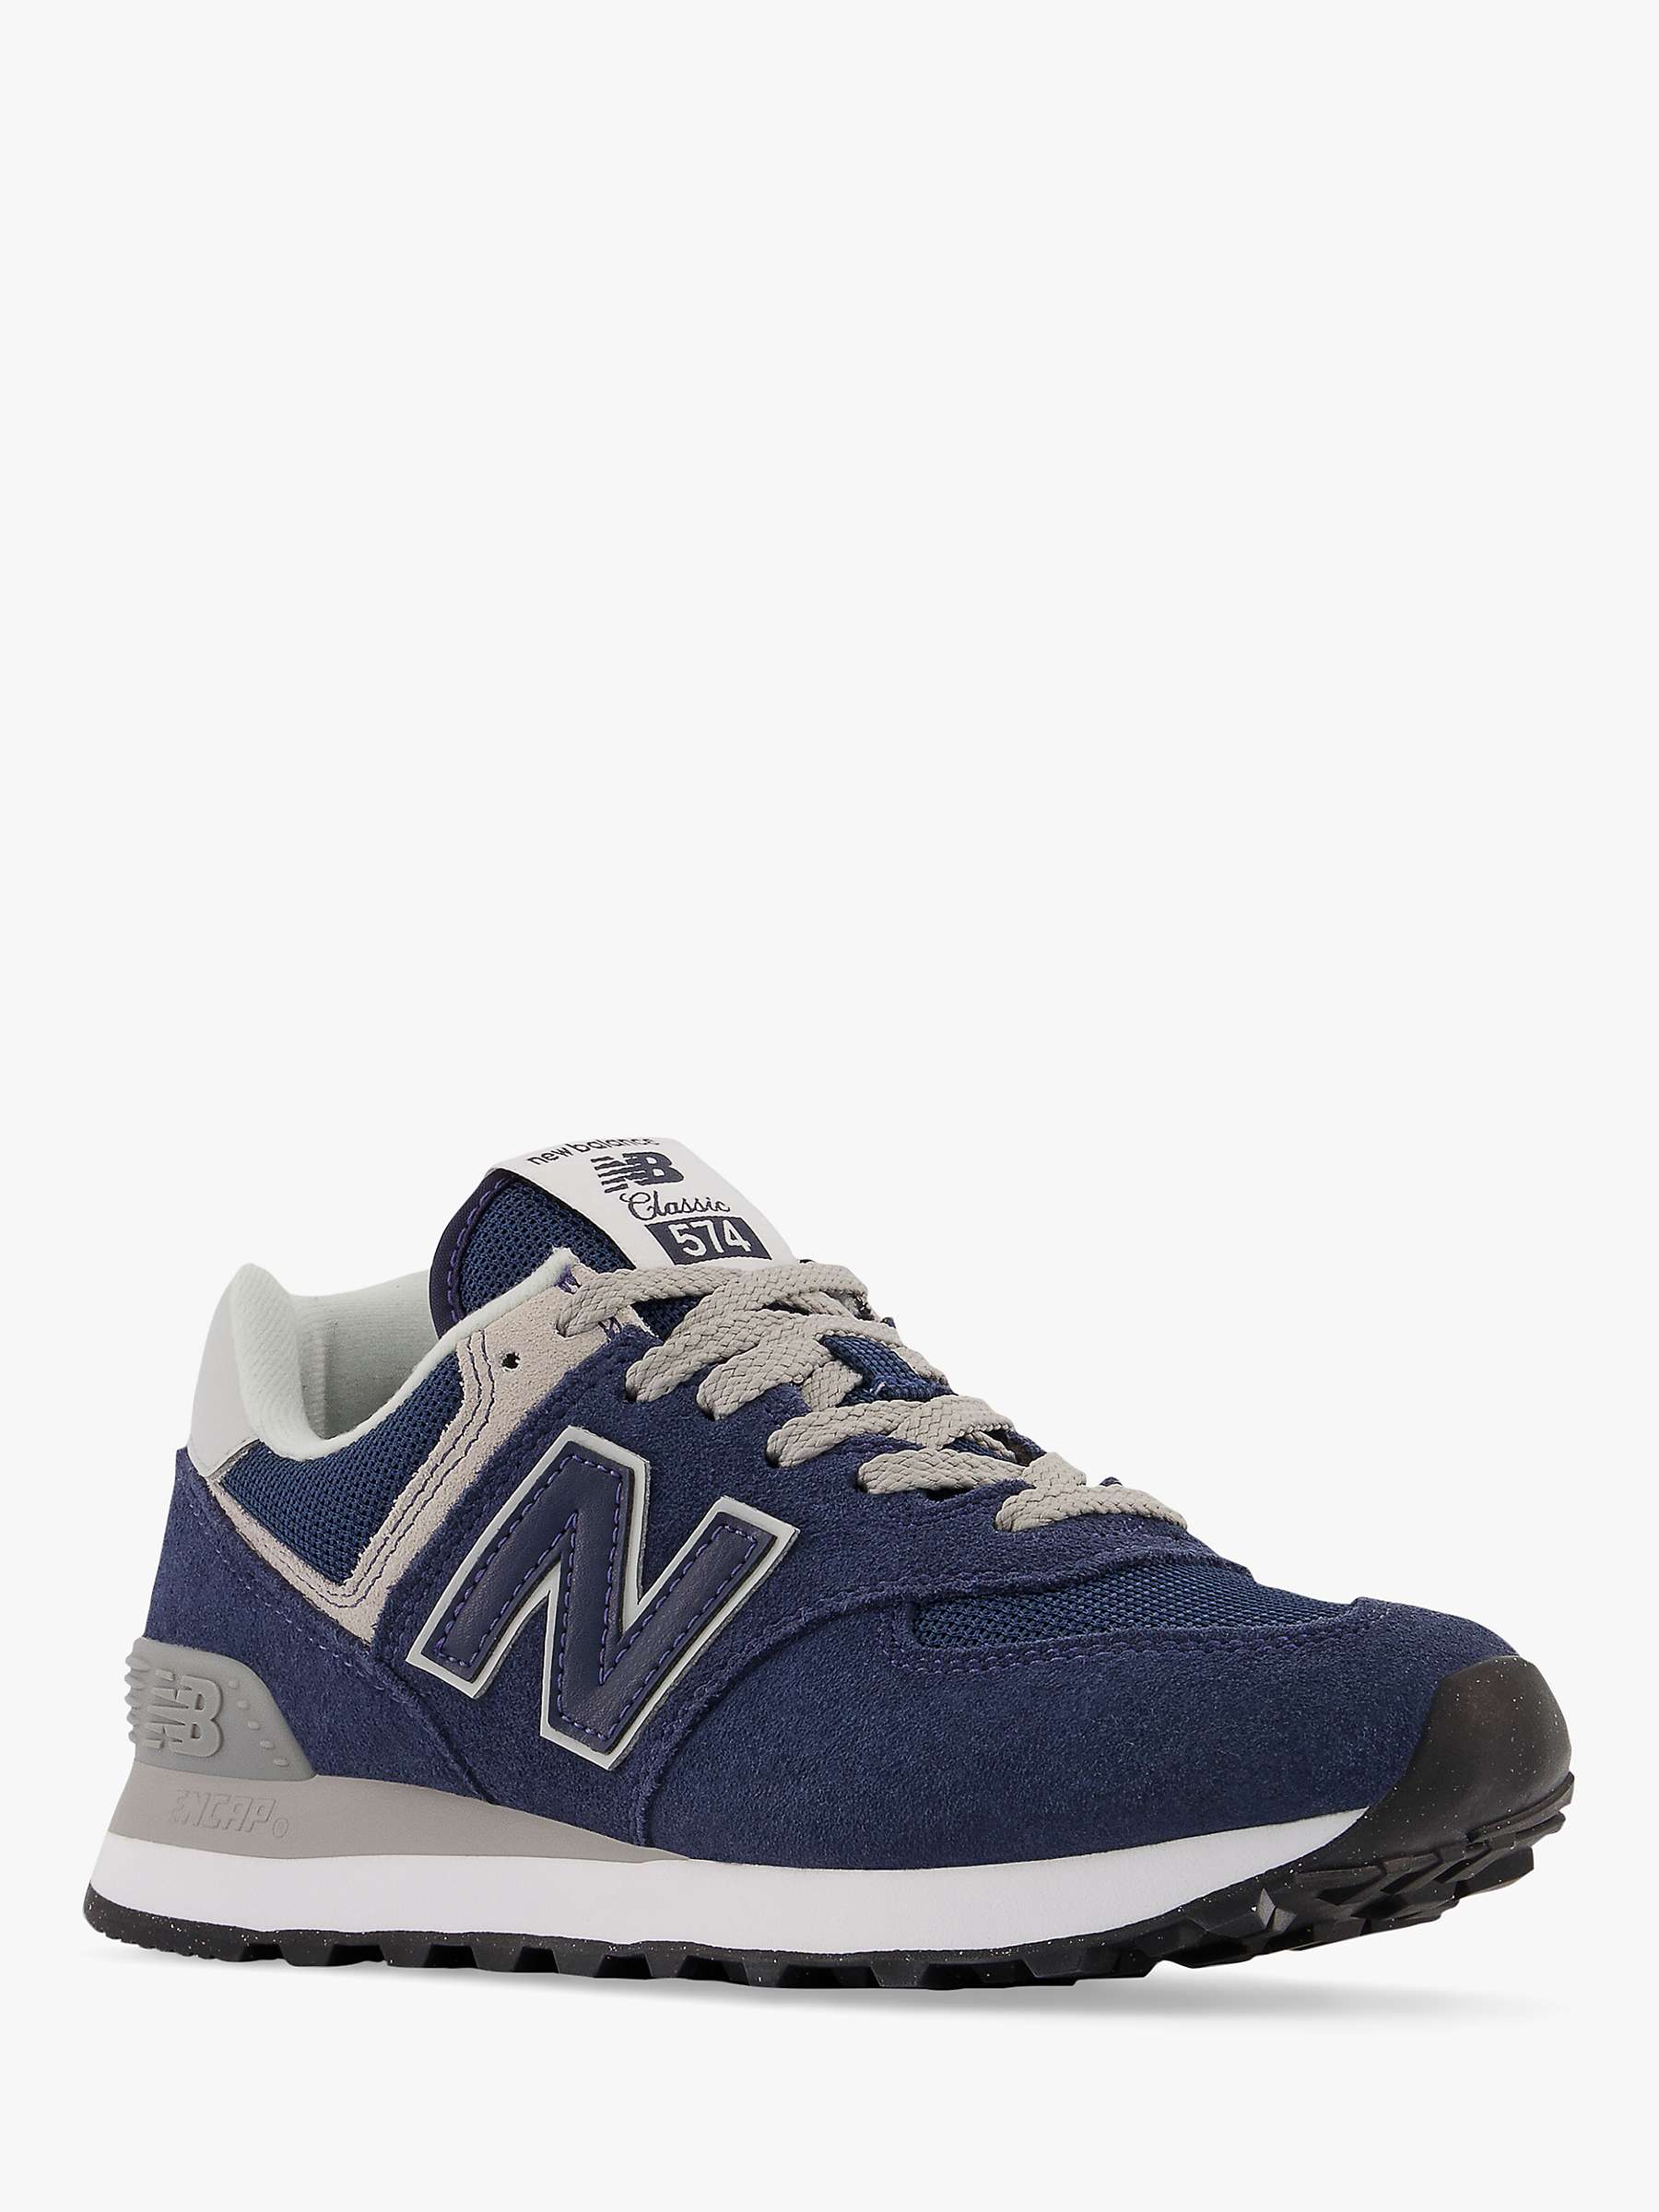 Buy New Balance 574v3 Trainers, Navy Online at johnlewis.com